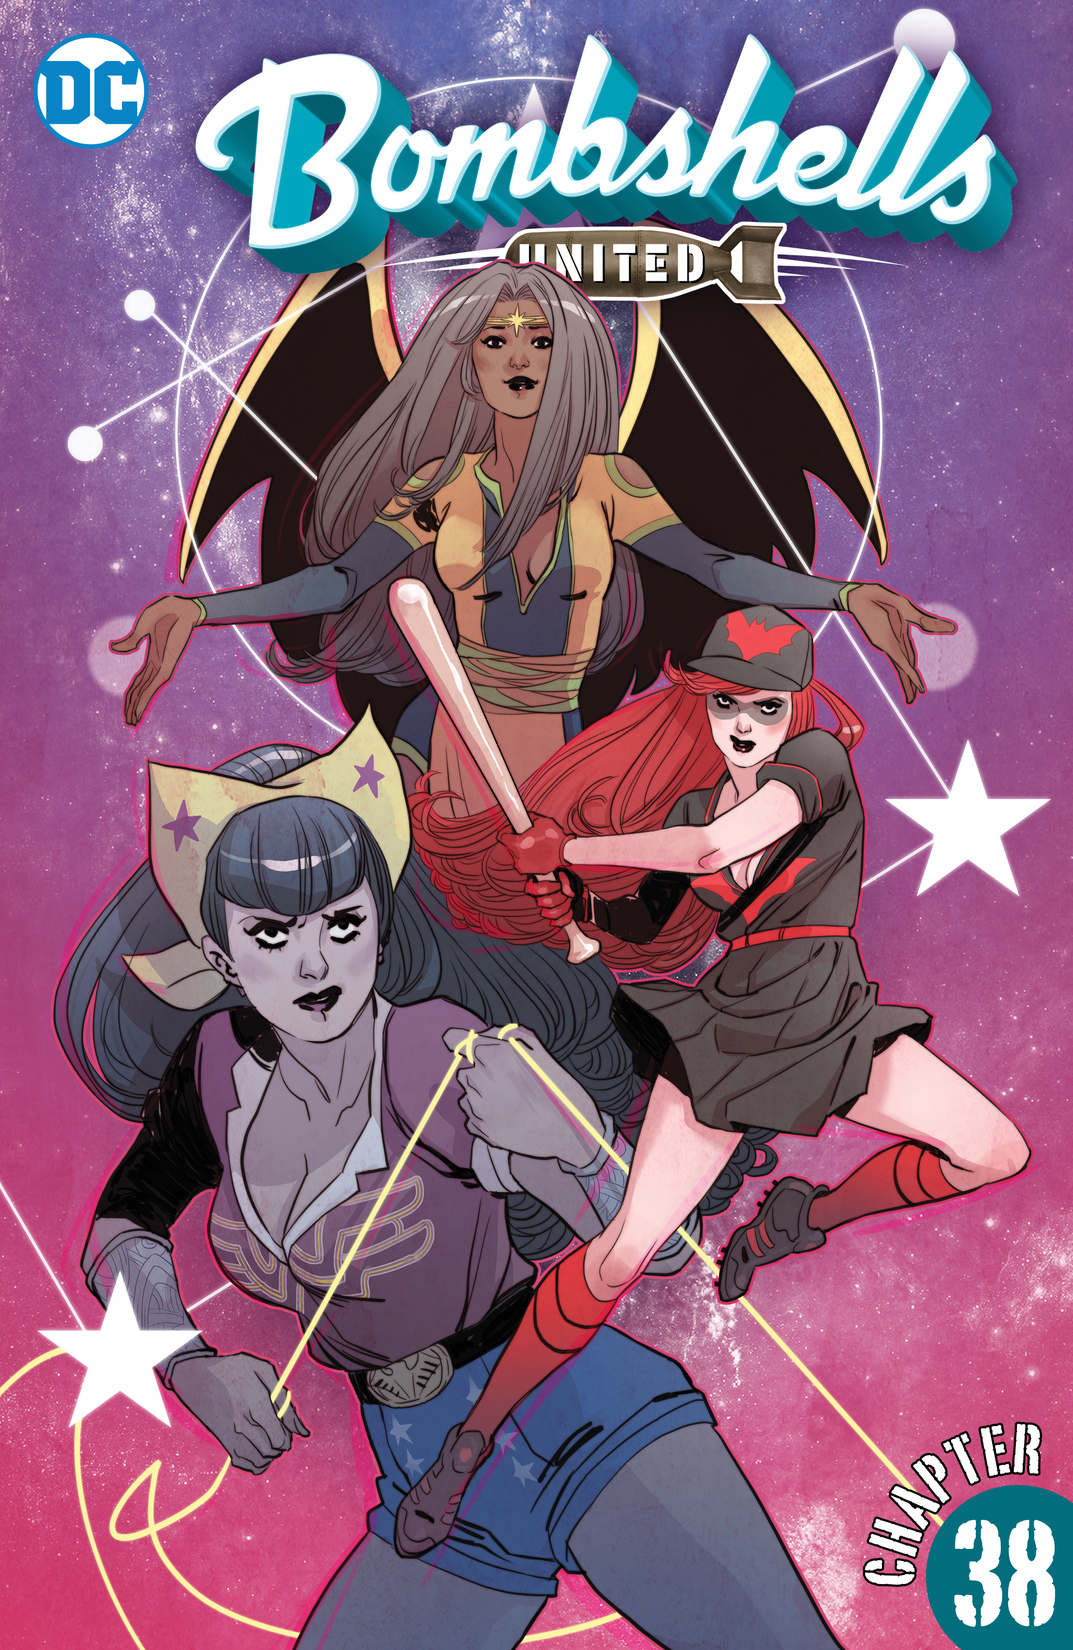 Bombshells: United #38 preview images